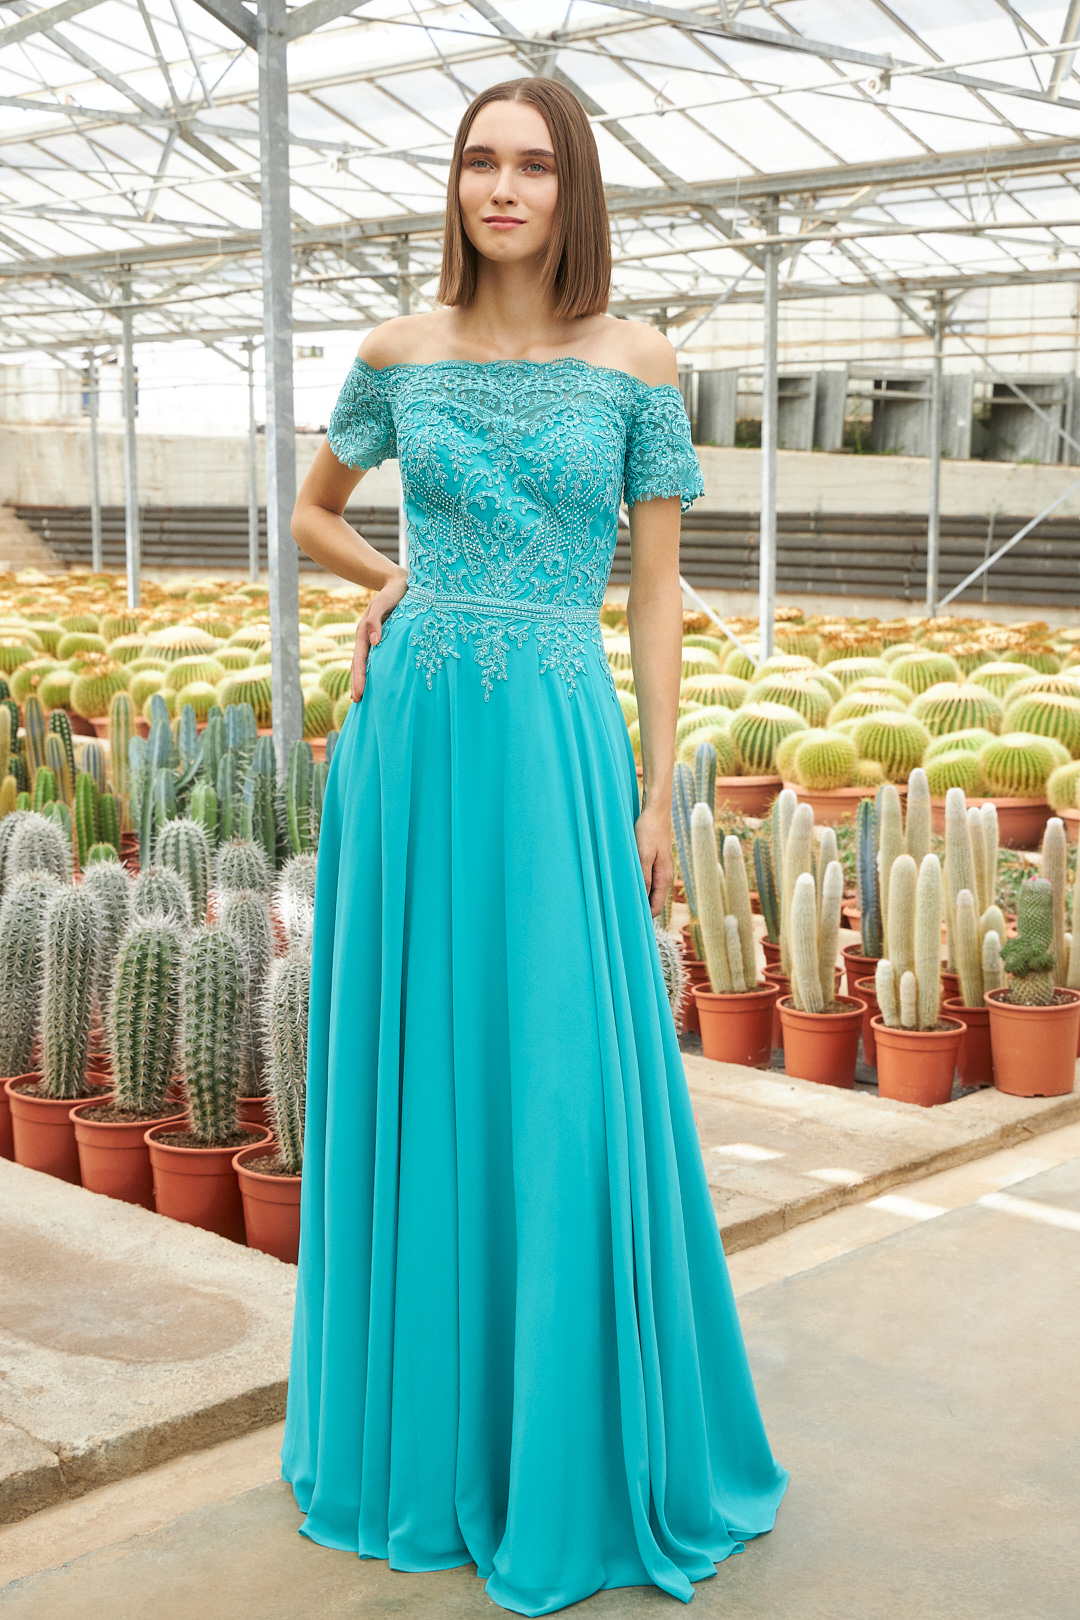 Classic Dresses / Long classic chiffon dress with lace beaded top and short sleeves